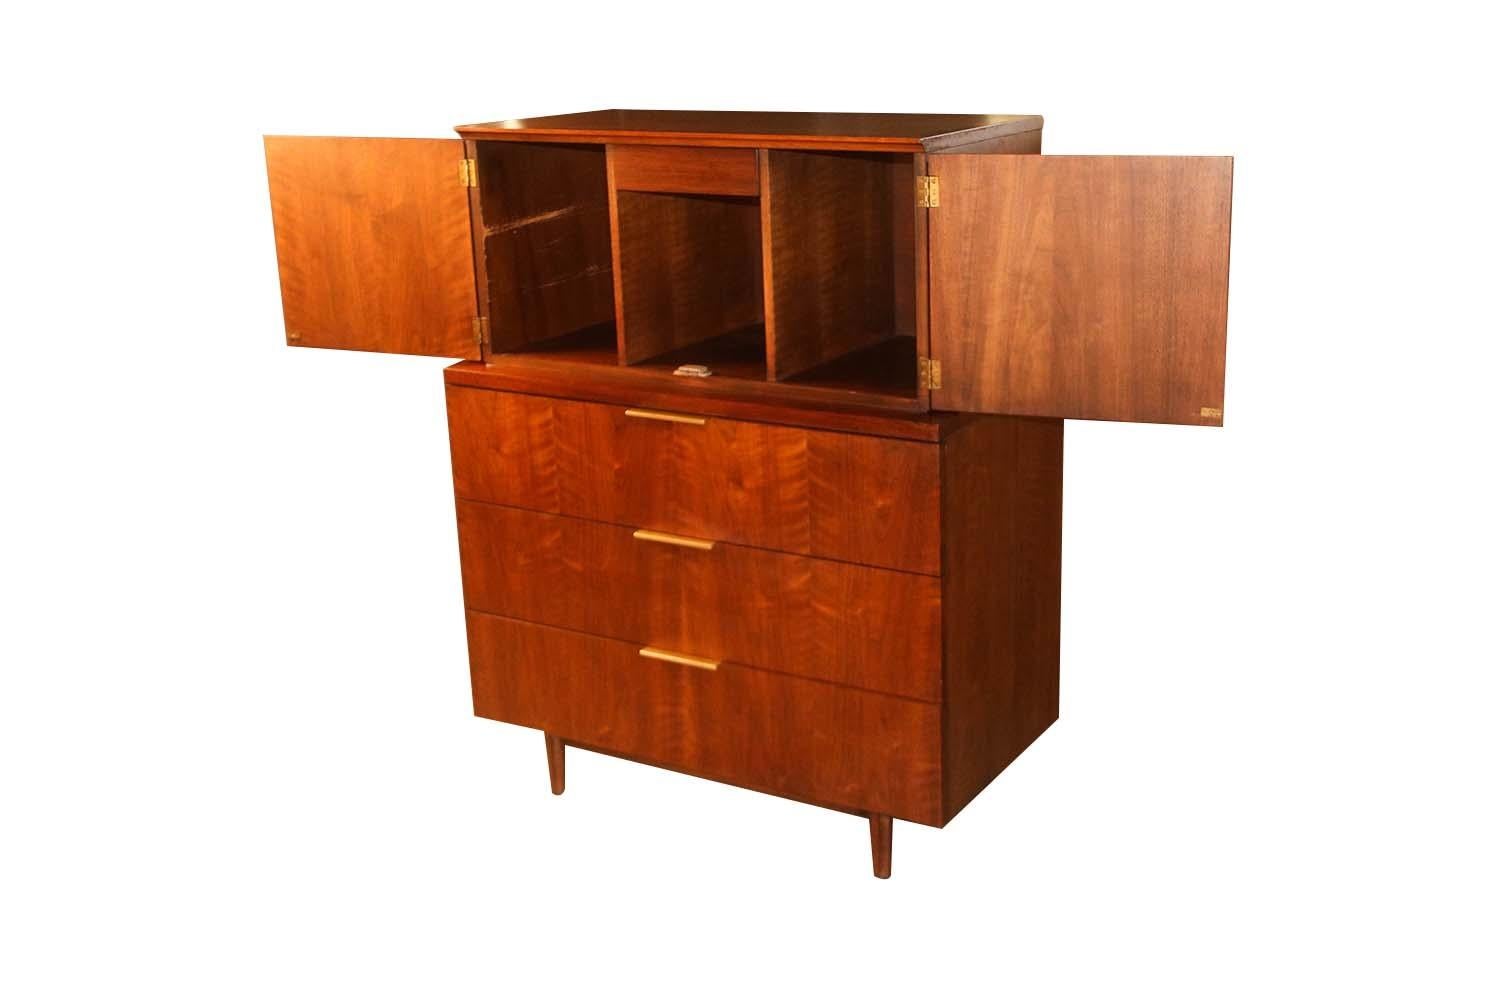 Absolutely stunning Mid-Century Modern Highboy dresser designed by John Stuart for Johnson Furniture Co. in the United States, circa 1960s. Pure style and sophistication, featuring three spacious long drawers on the bottom, with original horizontal